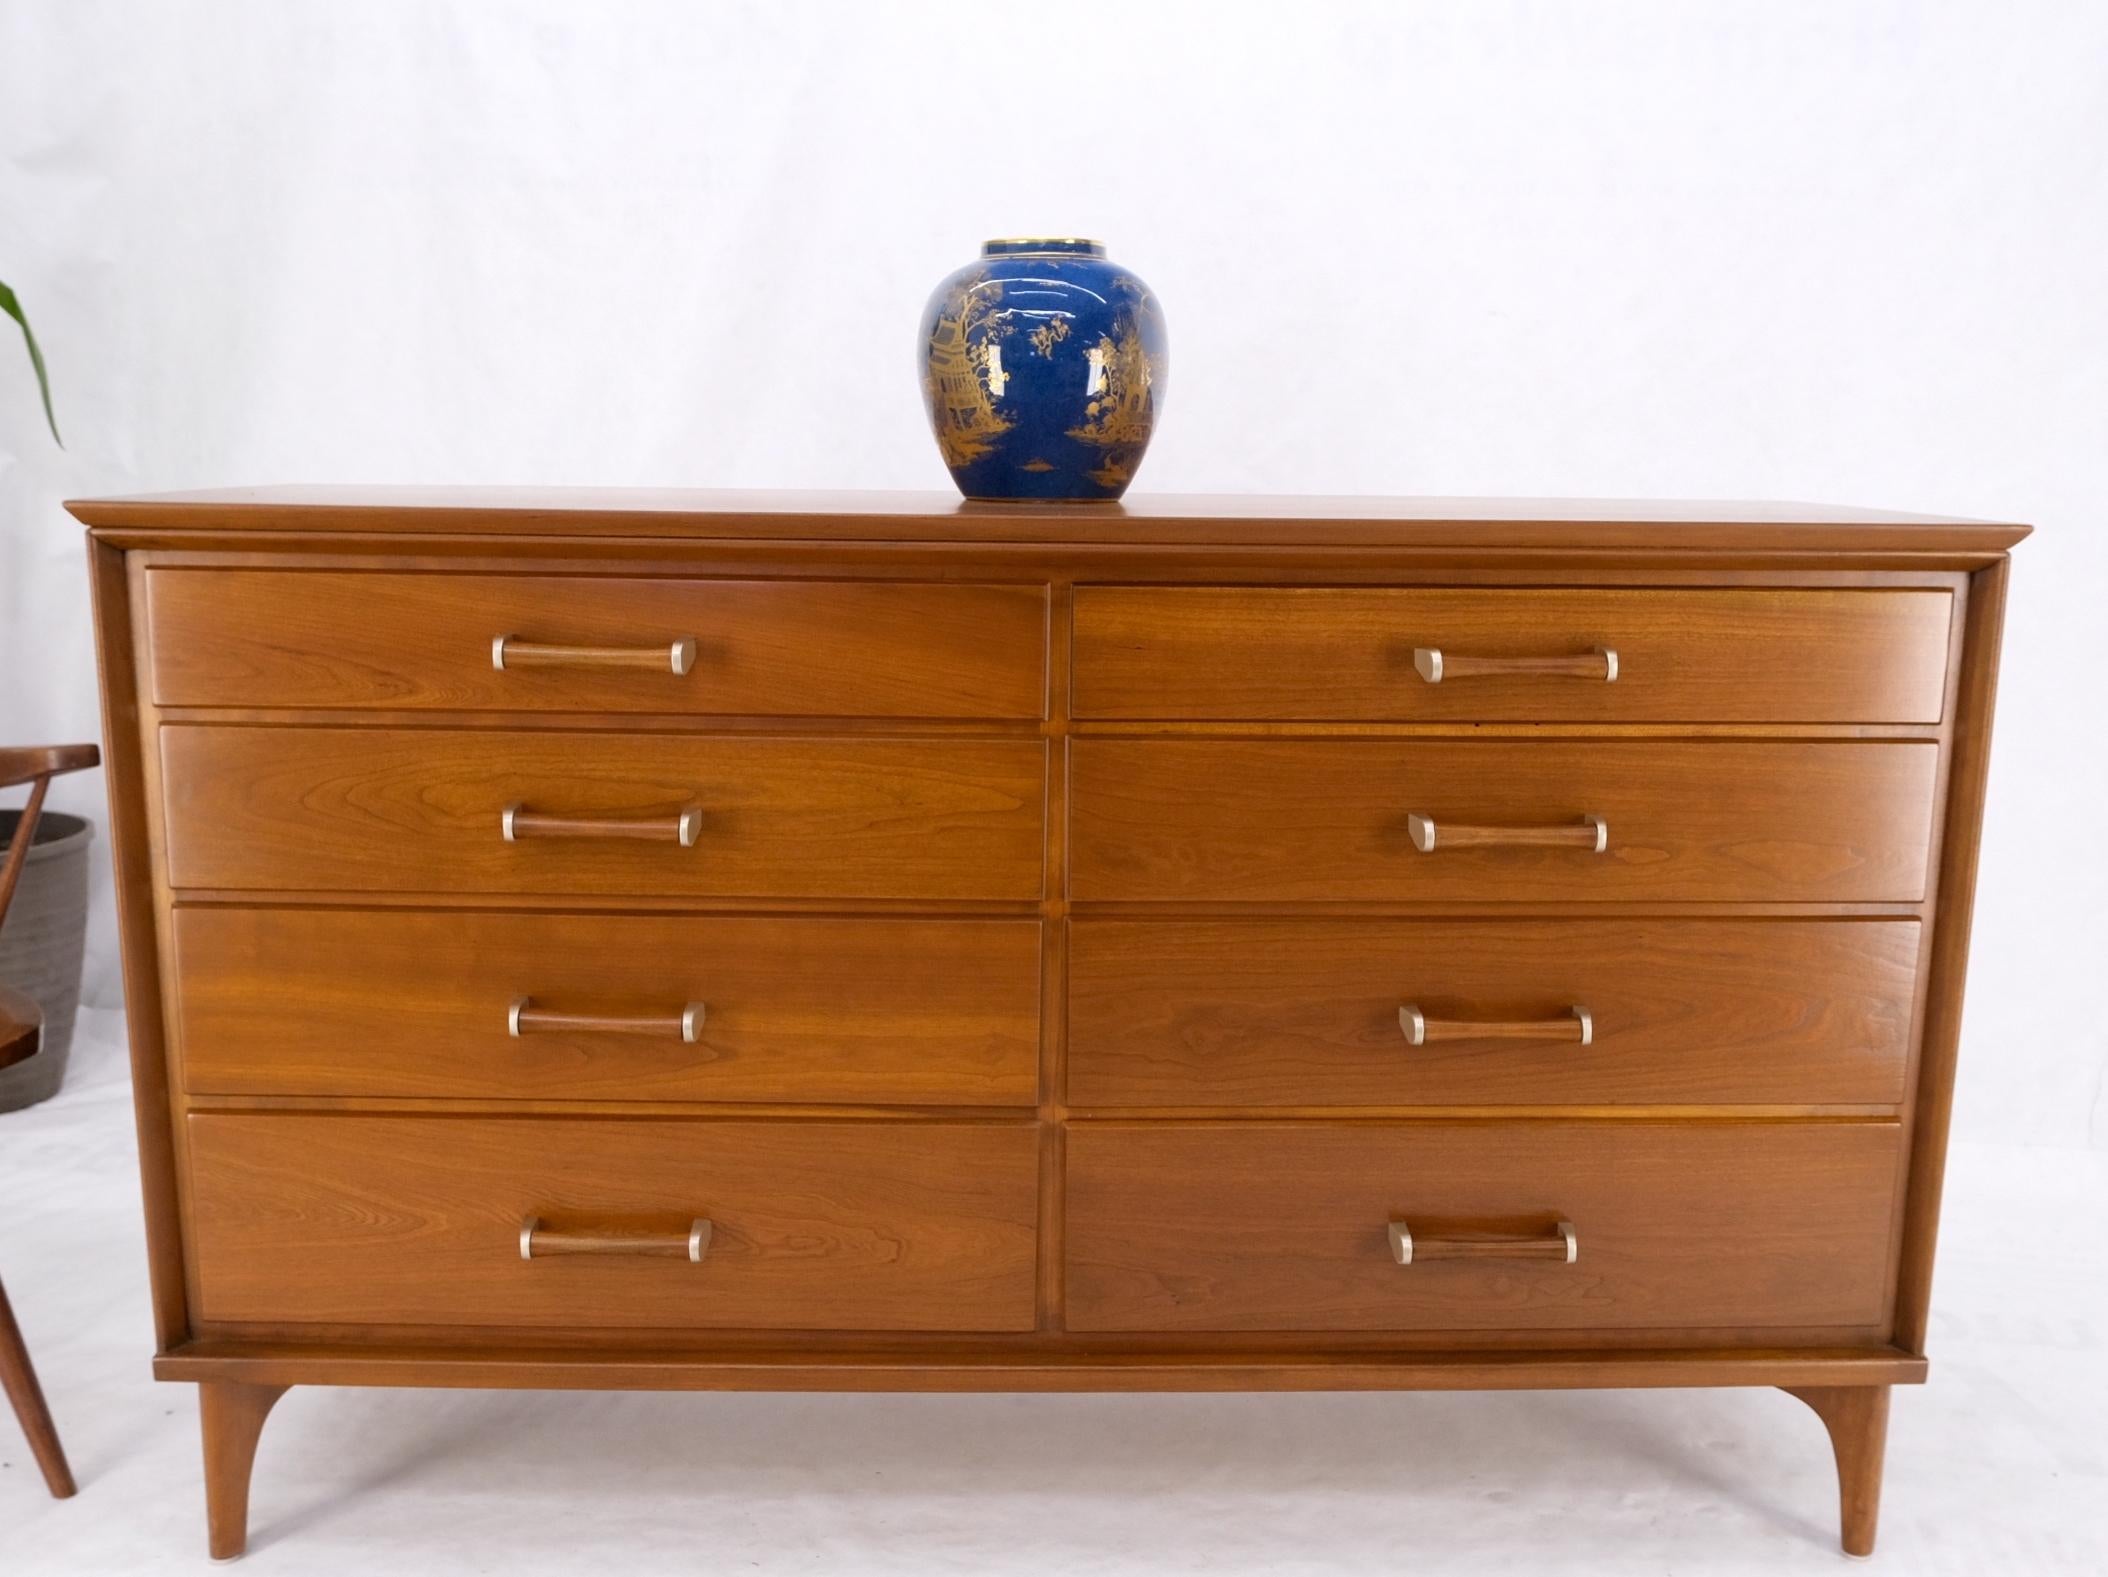 Solid Cherry Mid-Century Modern 8 Drawers Long Credenza Dresser Renzo Ruttily For Sale 10